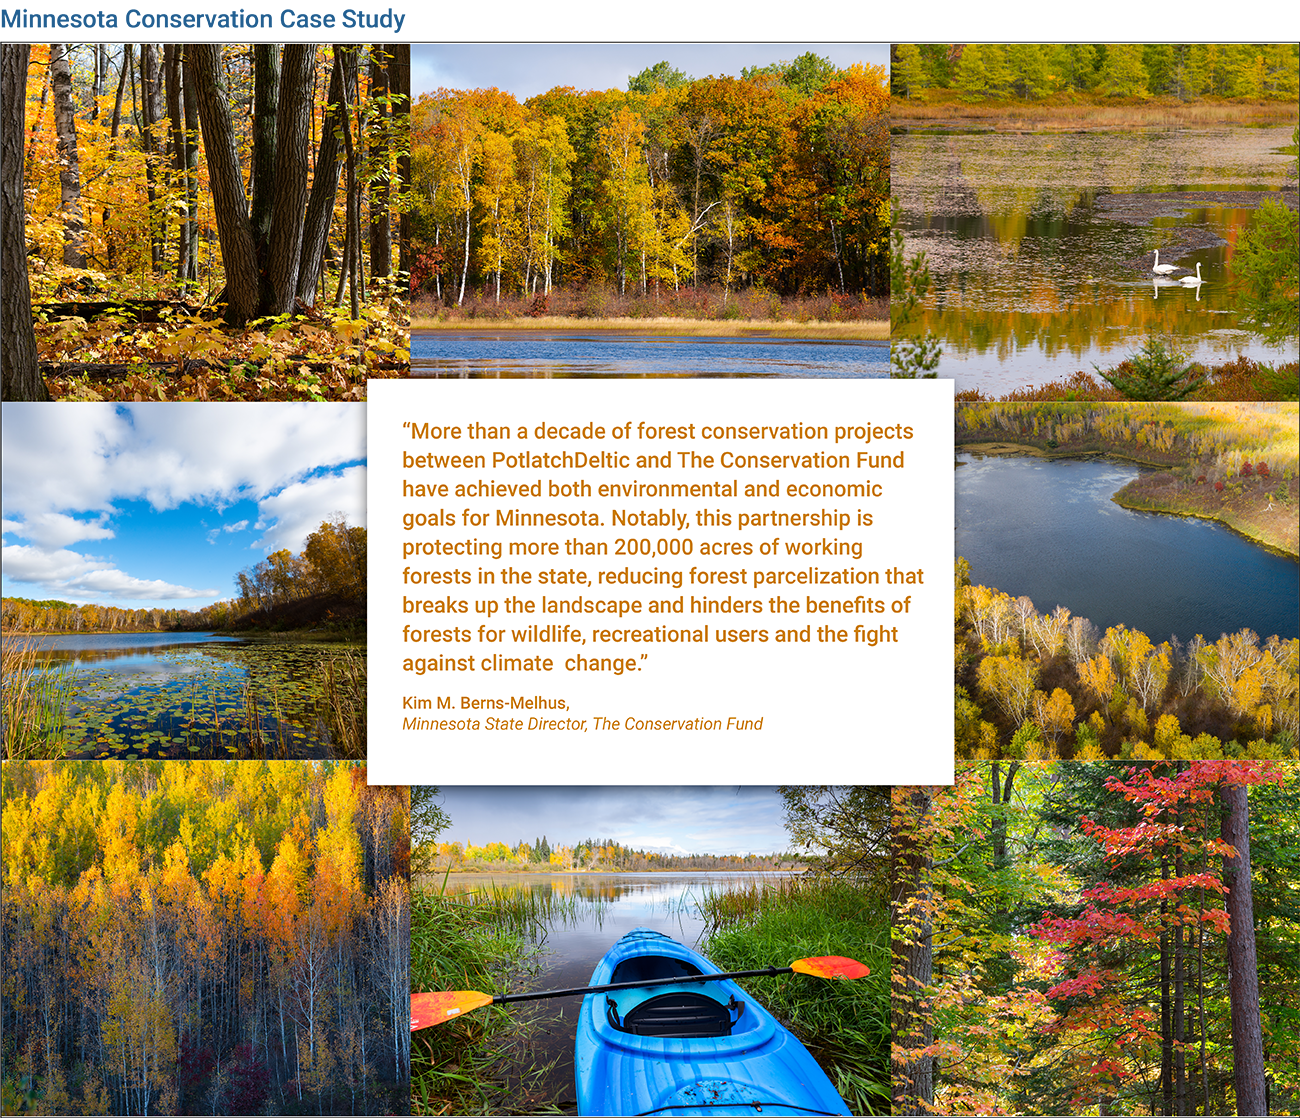 Lakes and forests image